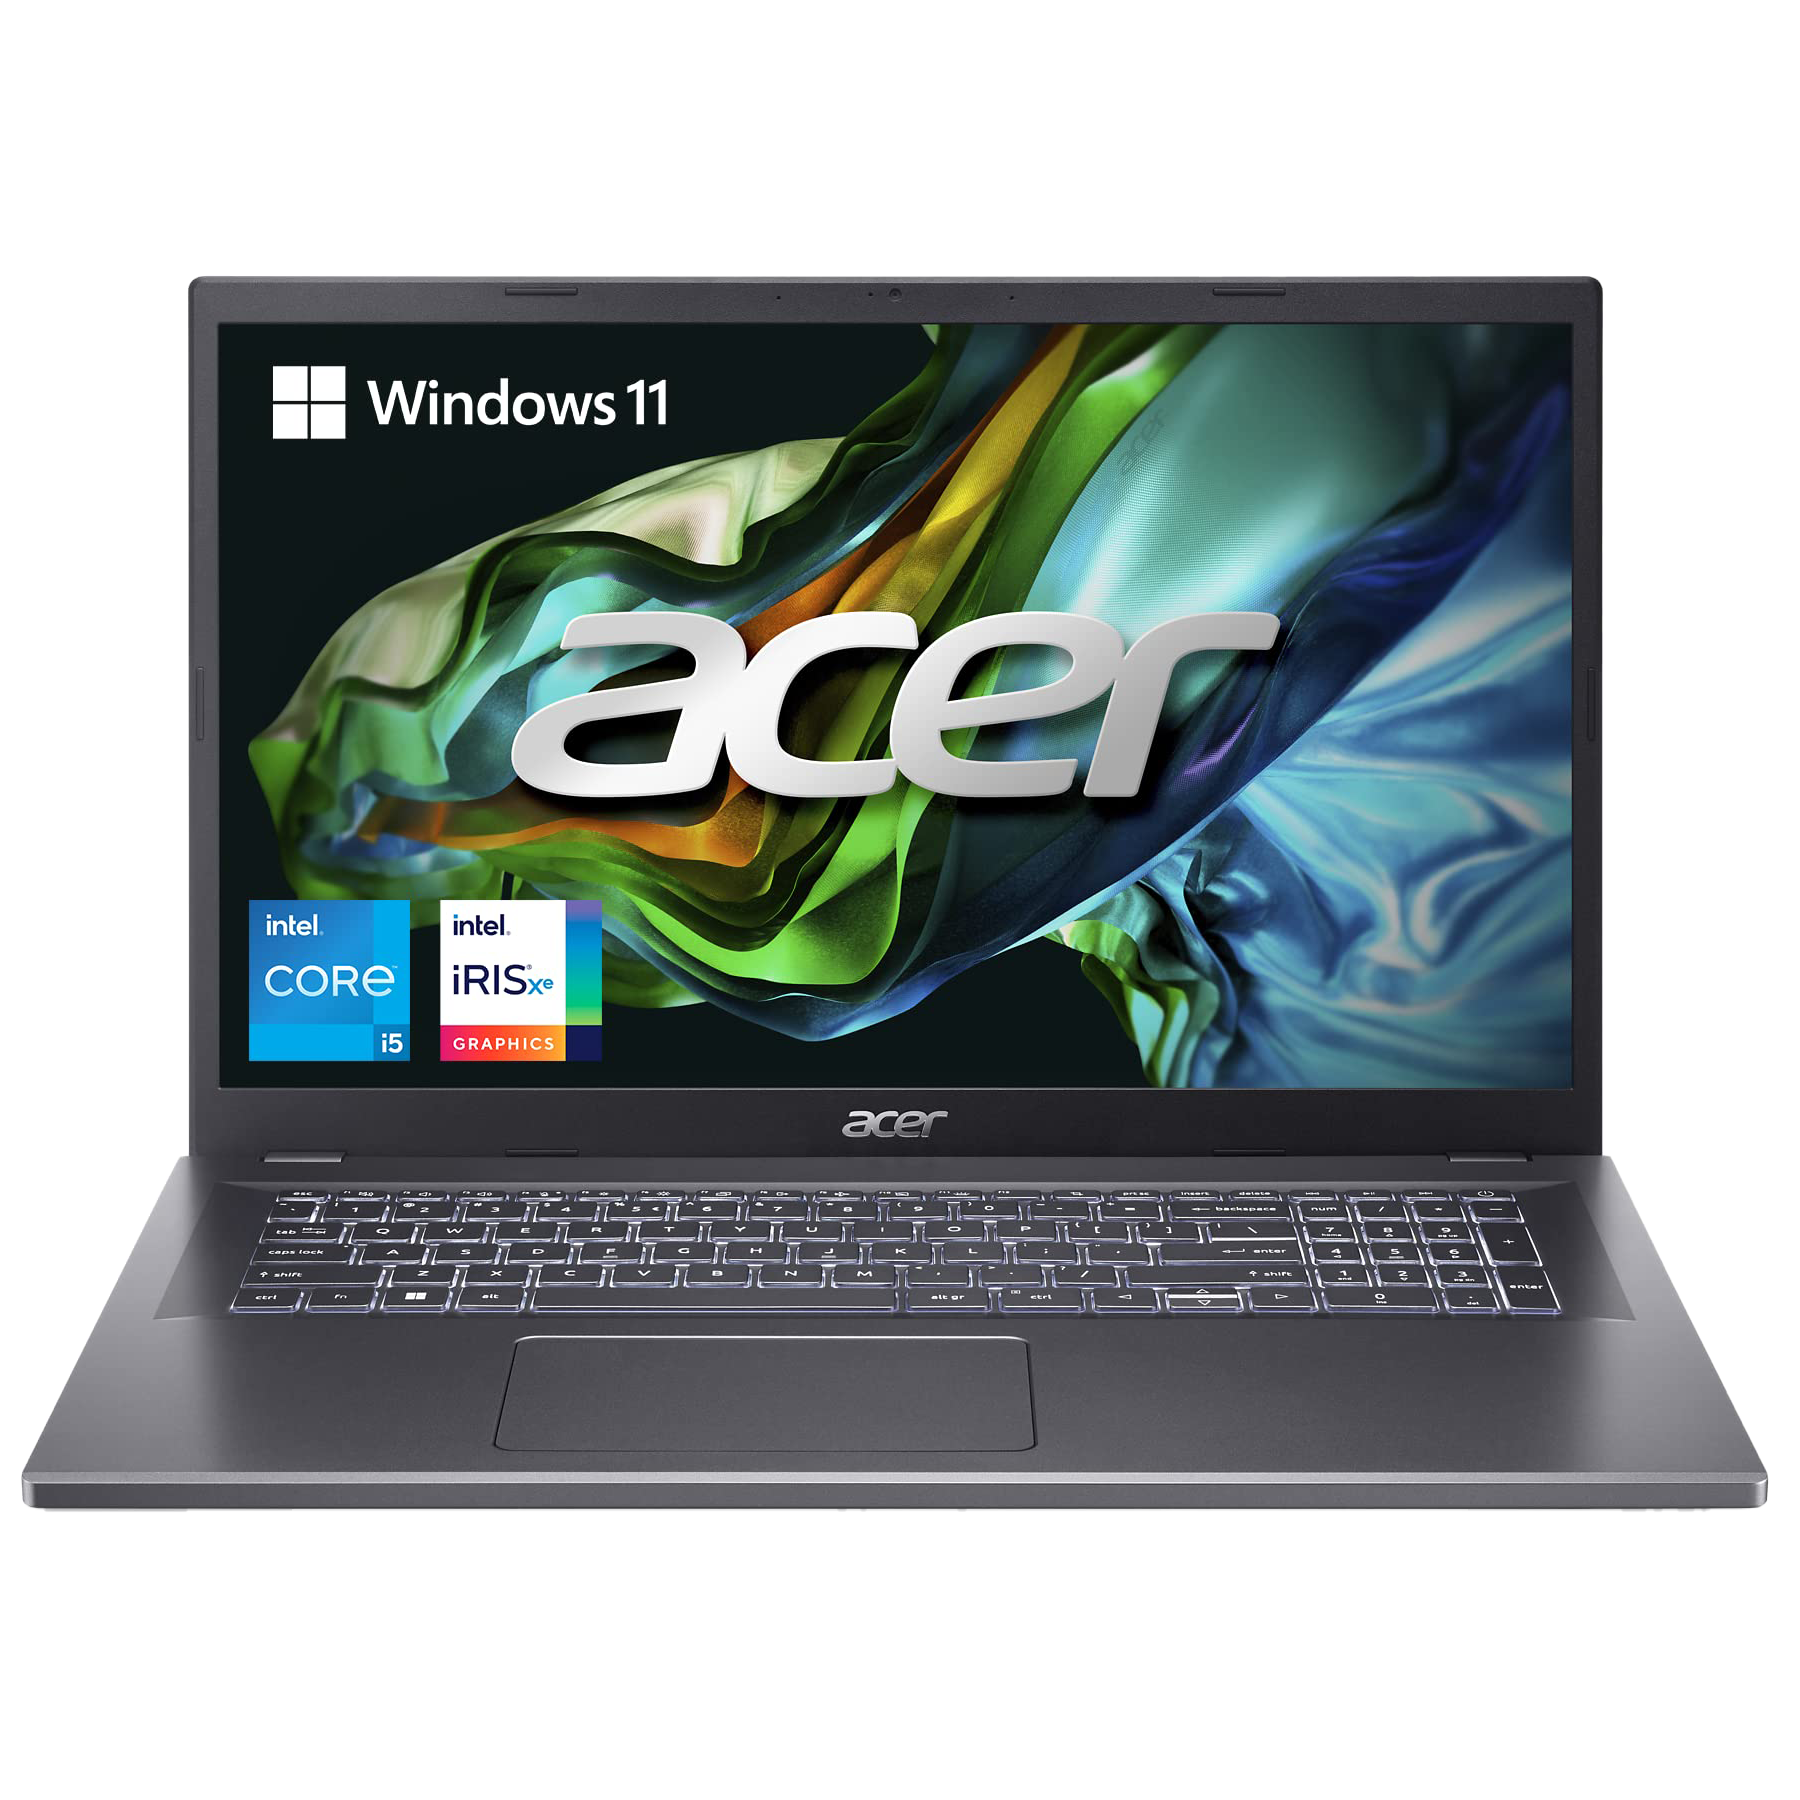 Front view of the Acer Aspire 5 17-inch